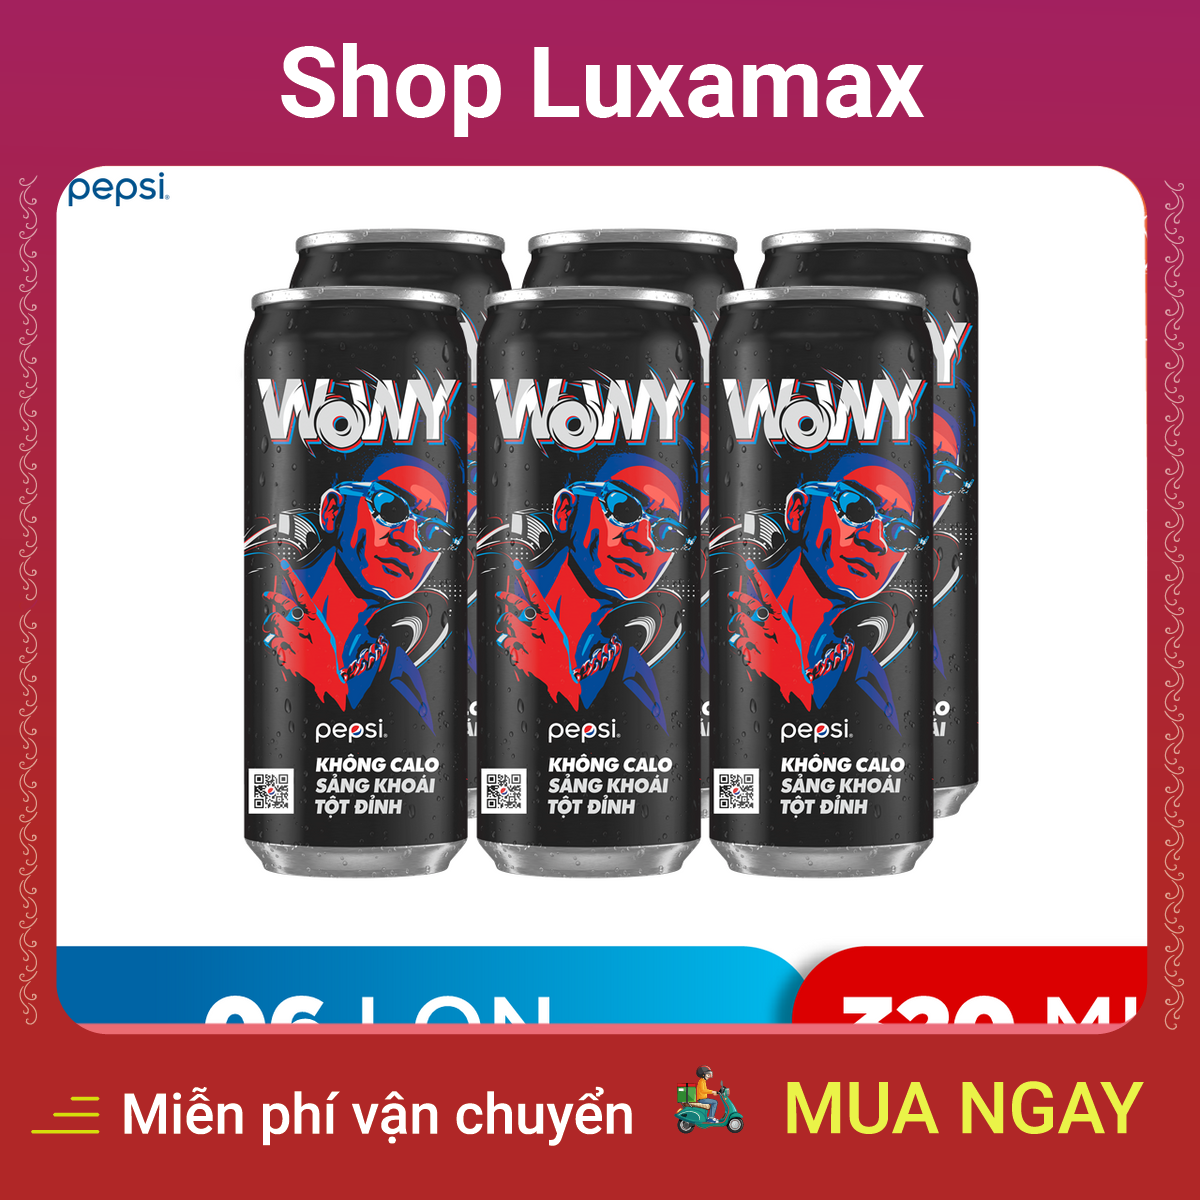 lốc 6 lon nước uống có gaz pepsi không calo (320ml lon) dtk93853755 - shop luxamax - 6 cans of drinking water with gaz pepsi without calories (320ml cans) 2